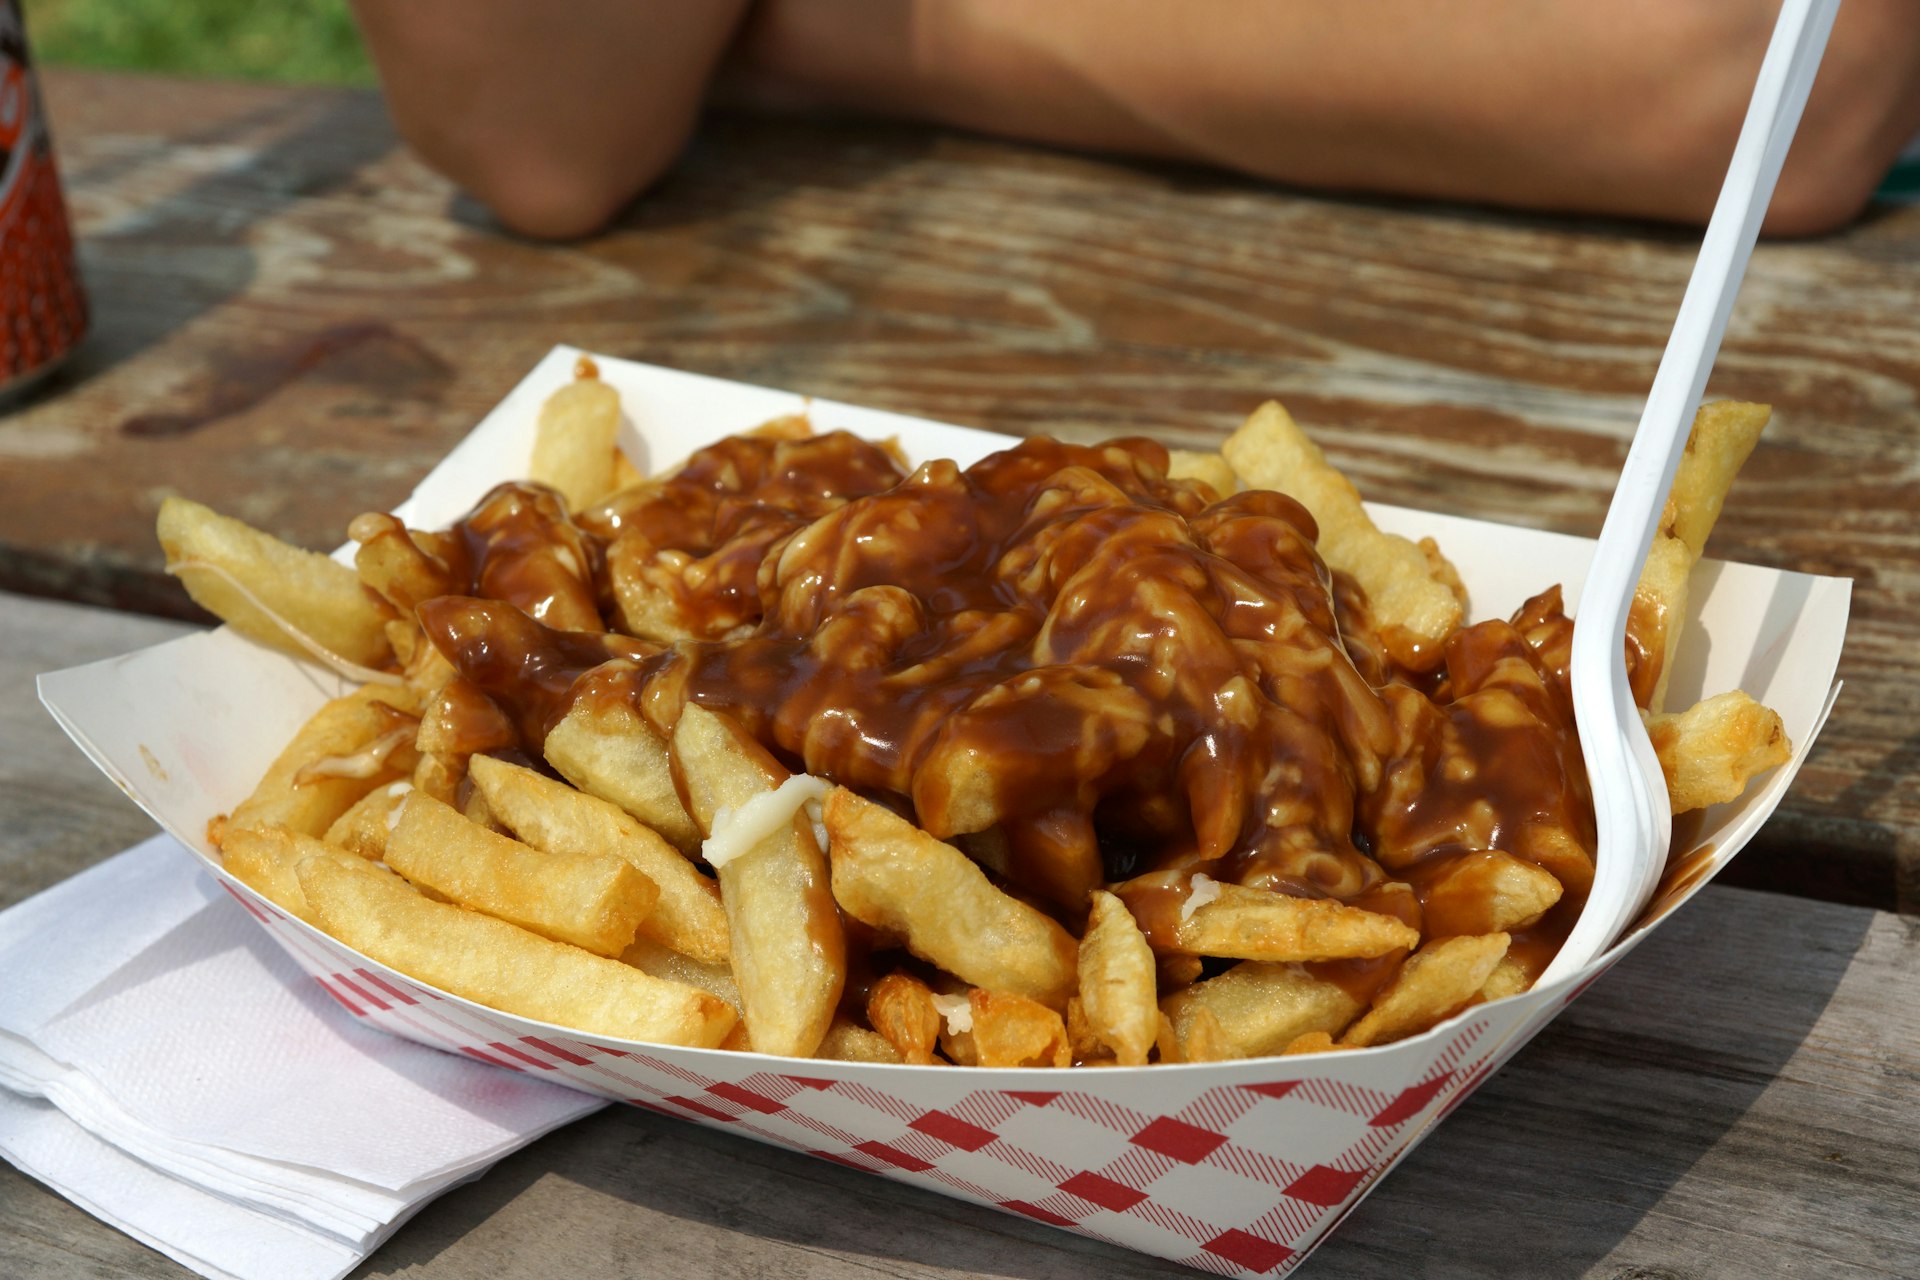 Take-out order of poutine on a picnic table